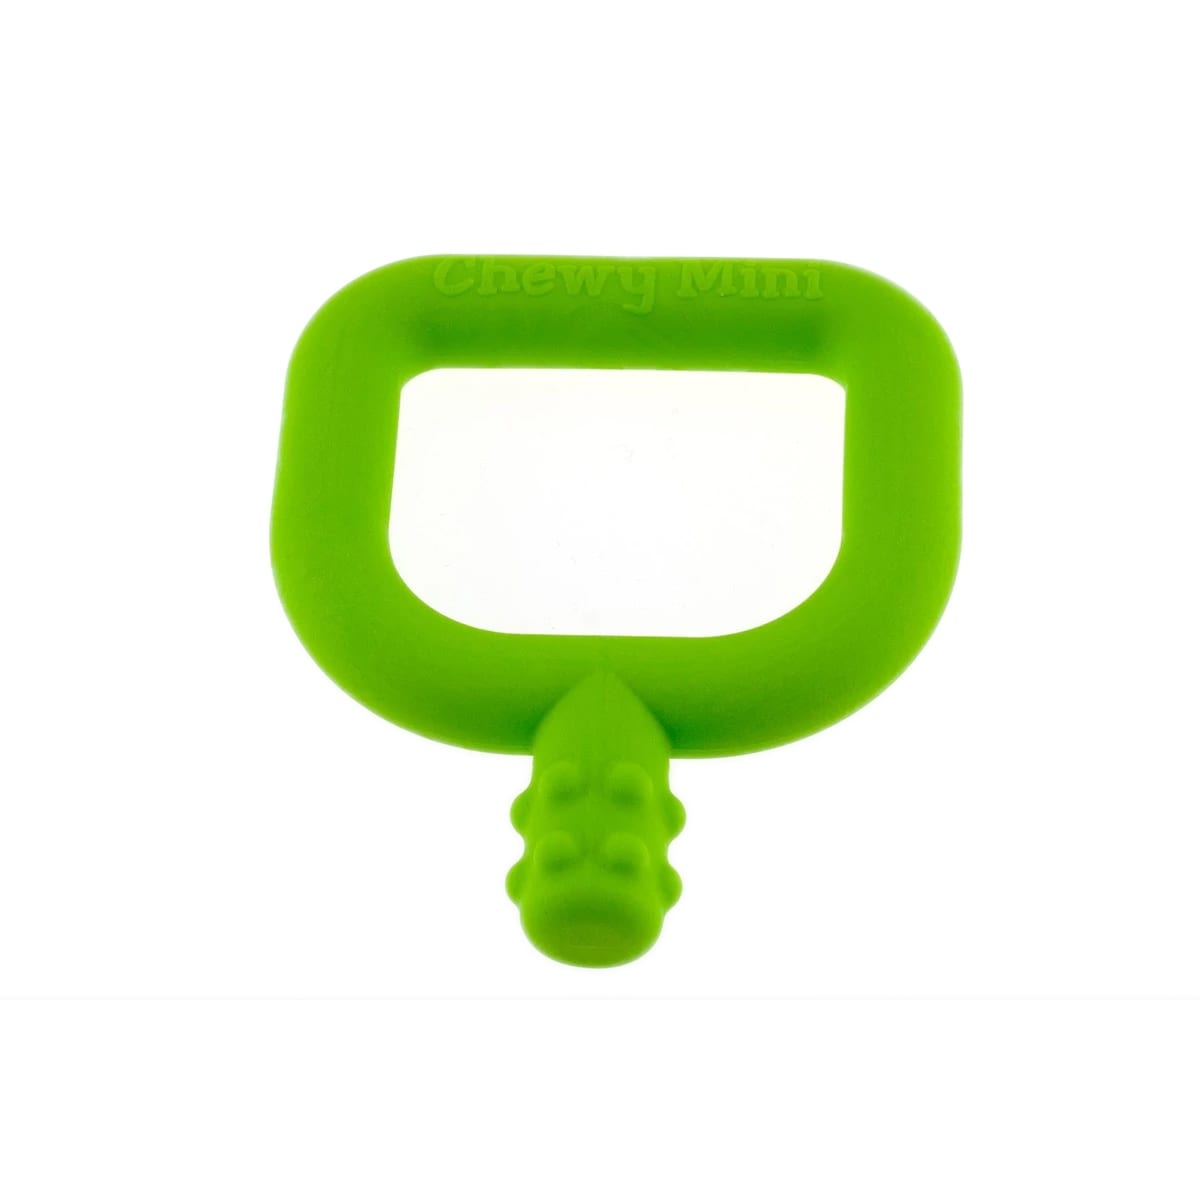 MINI CHEWY - GREEN KNOBBY - STAGE 2 TEETHER